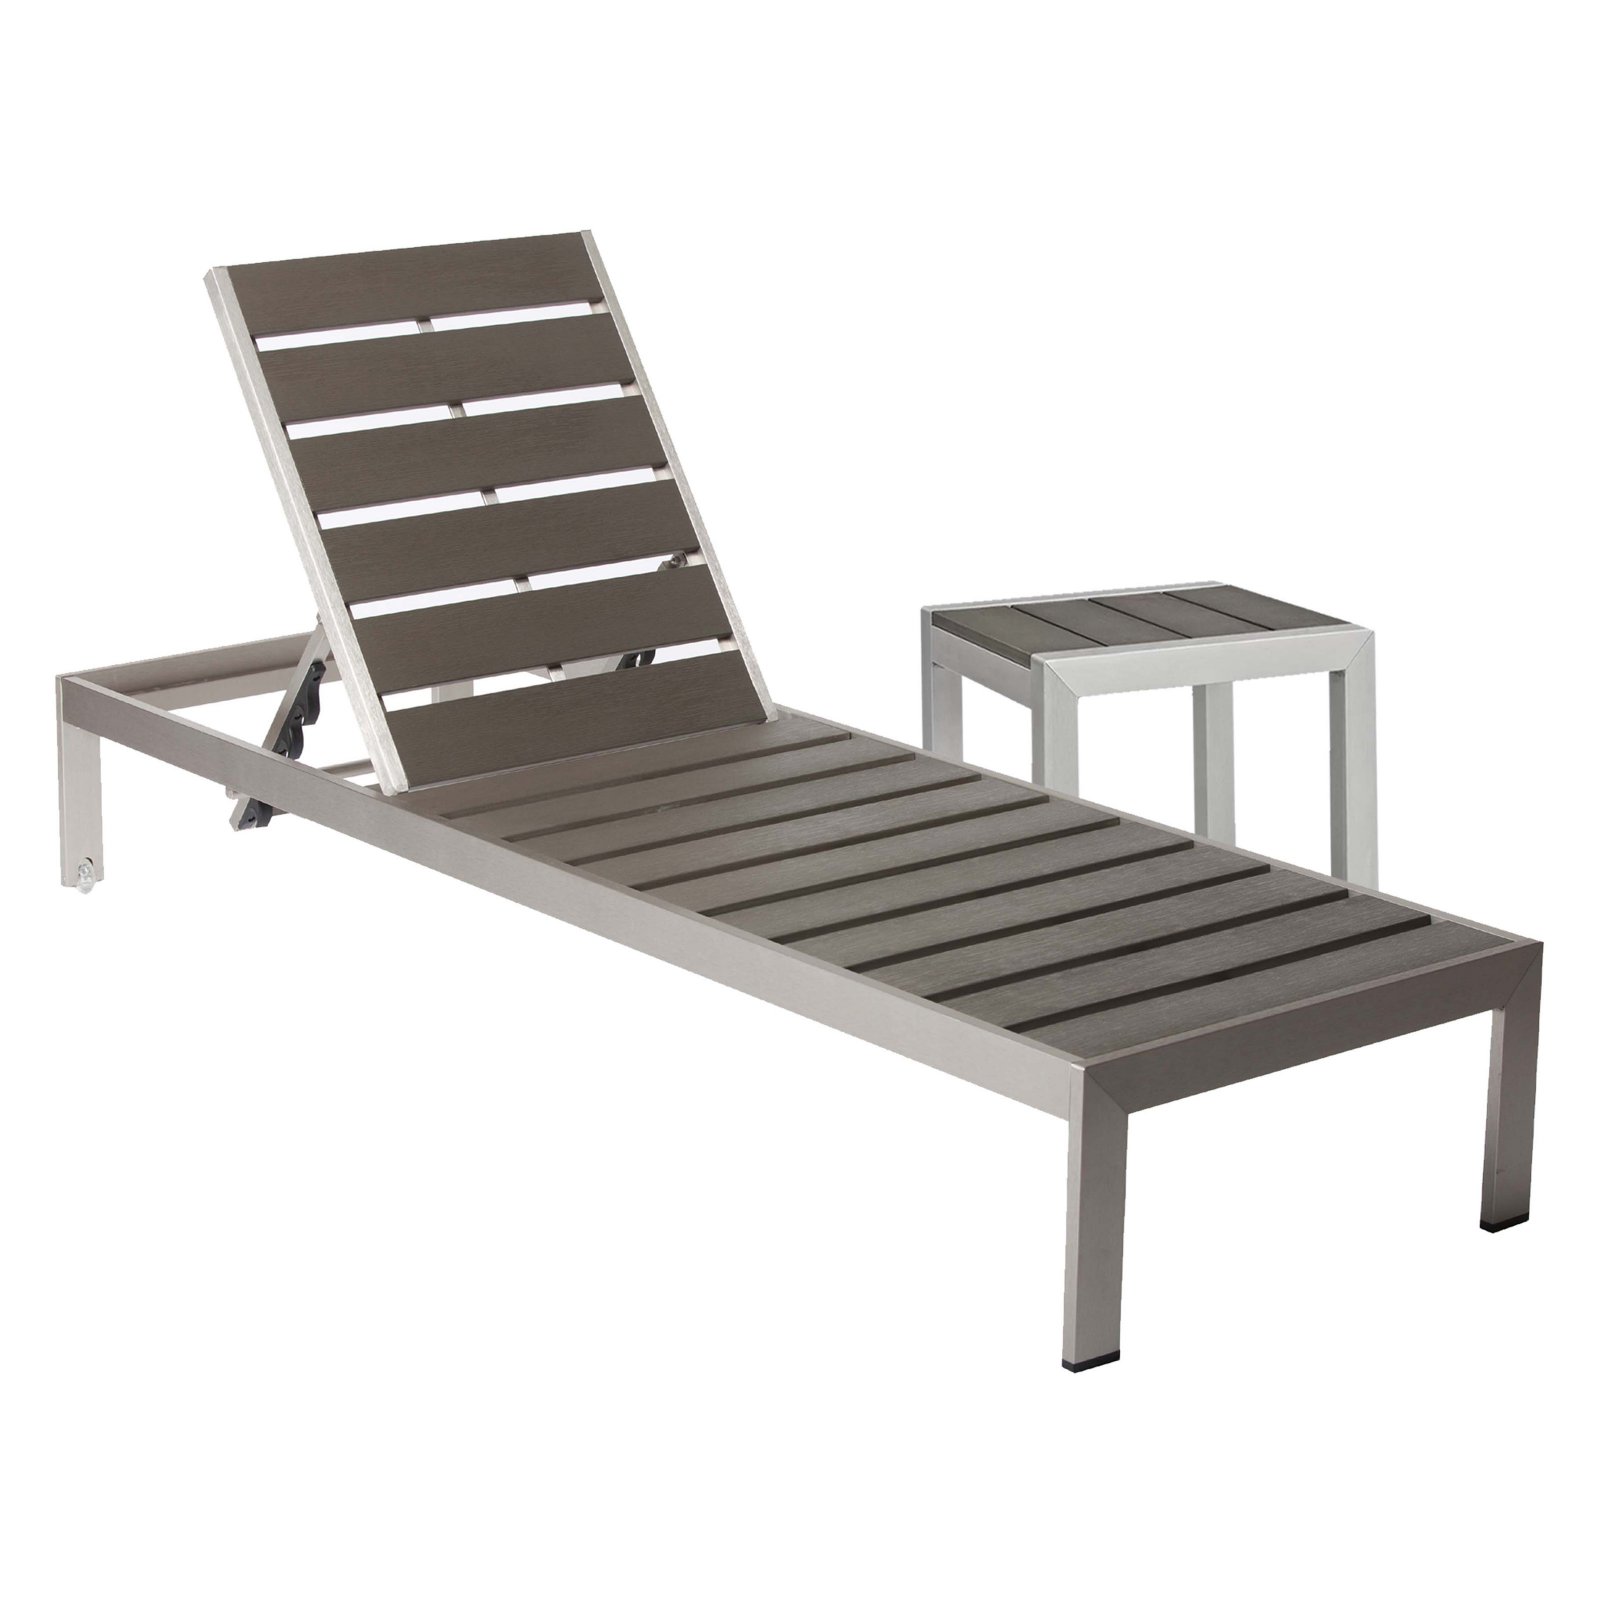 Pangea Home Joseph Lounger and Side Table Sets - image 2 of 2